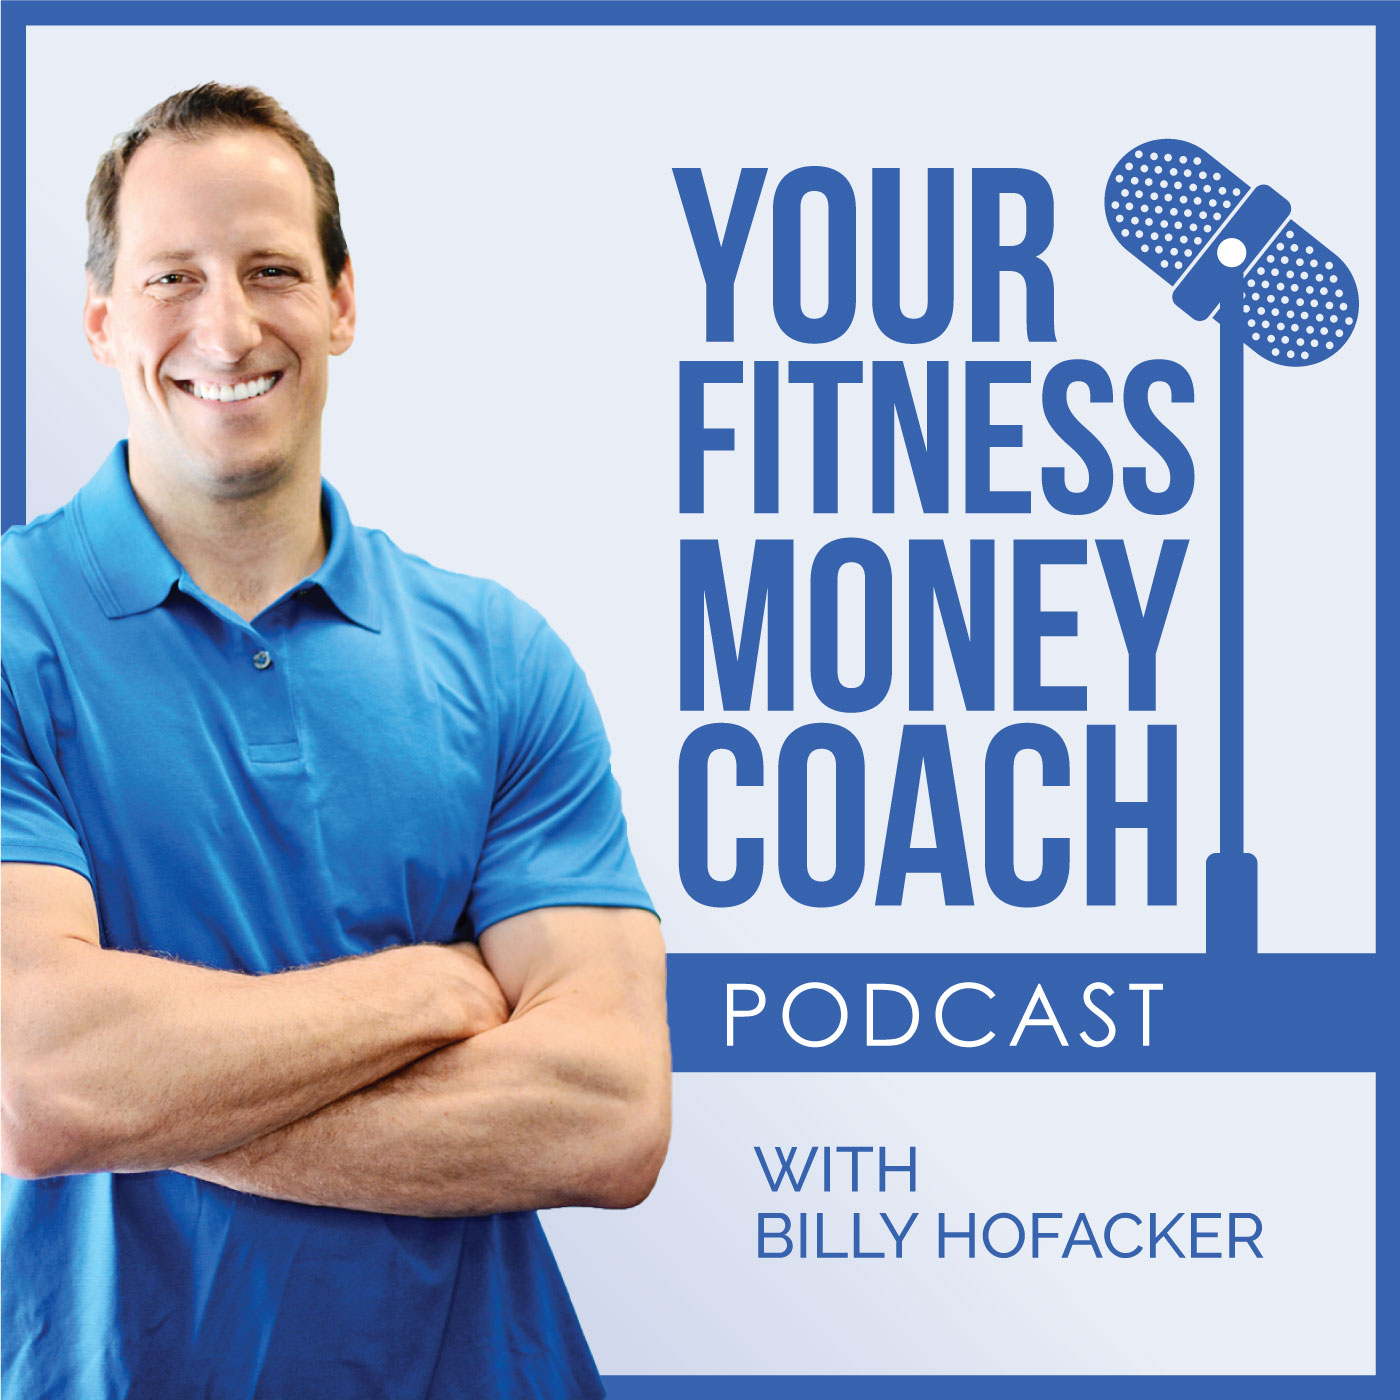 YOUR FITNESS MONEY COACH